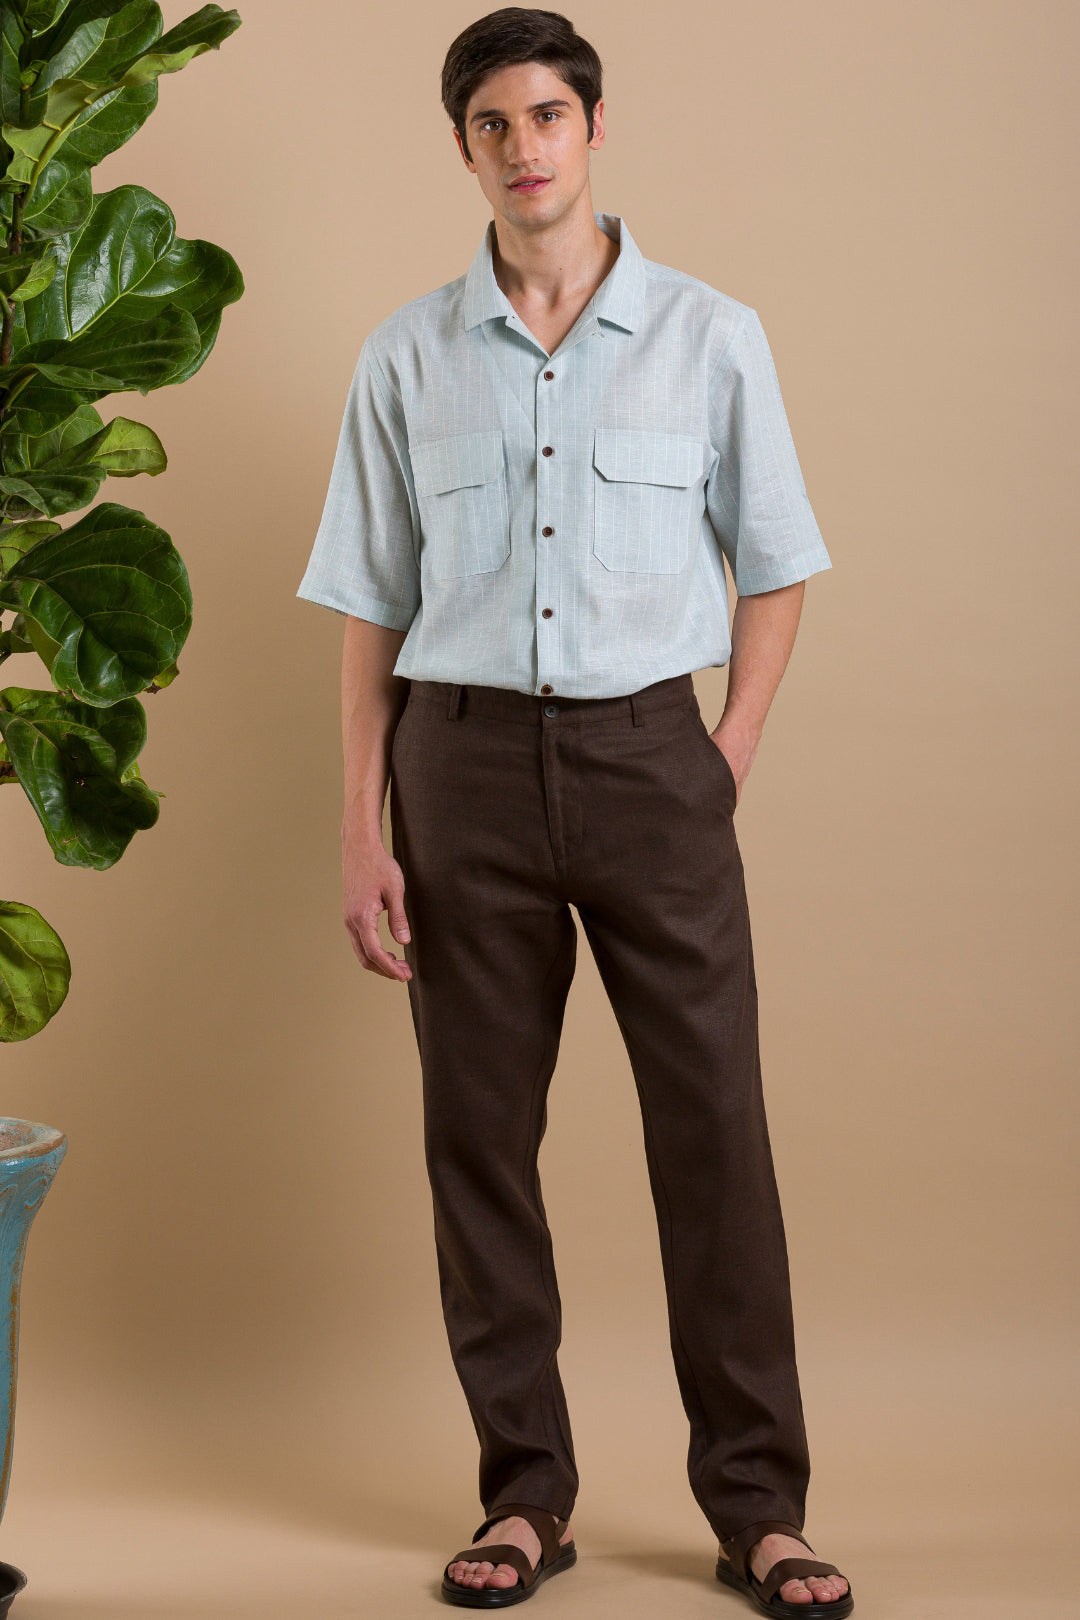 Brown linen trousers